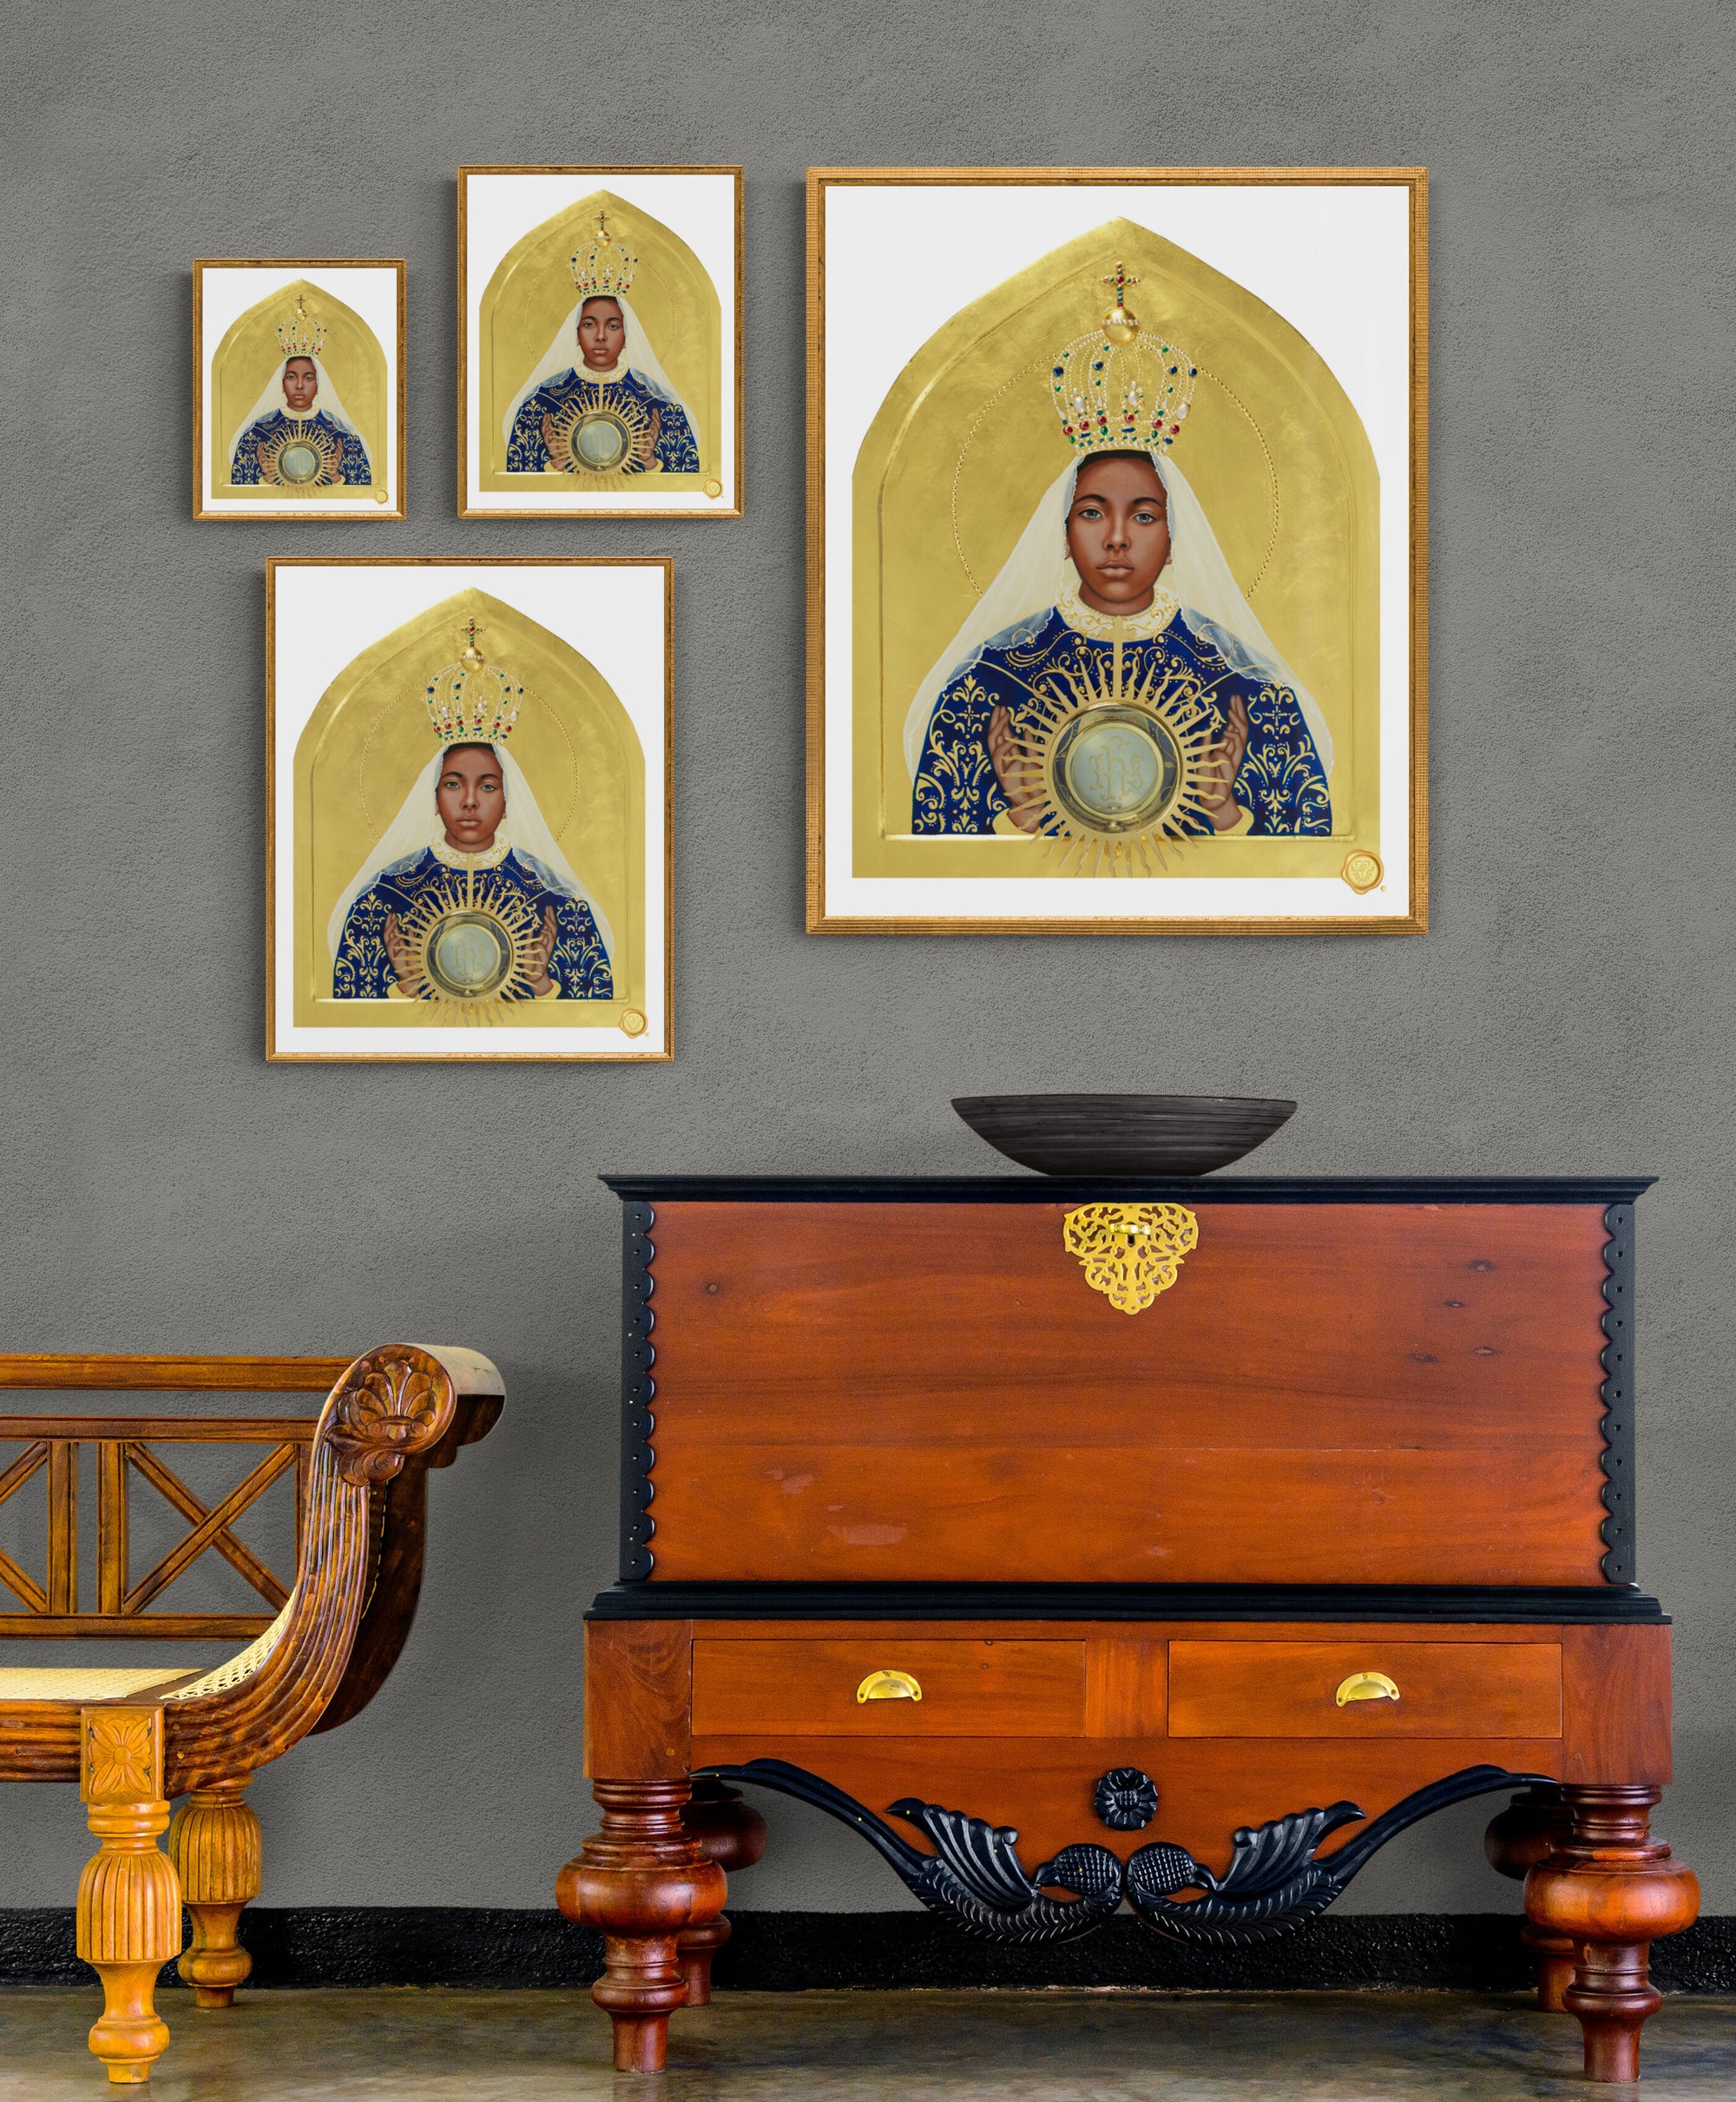 Our Lady of Africa / Tabernacle of the World Icon Print